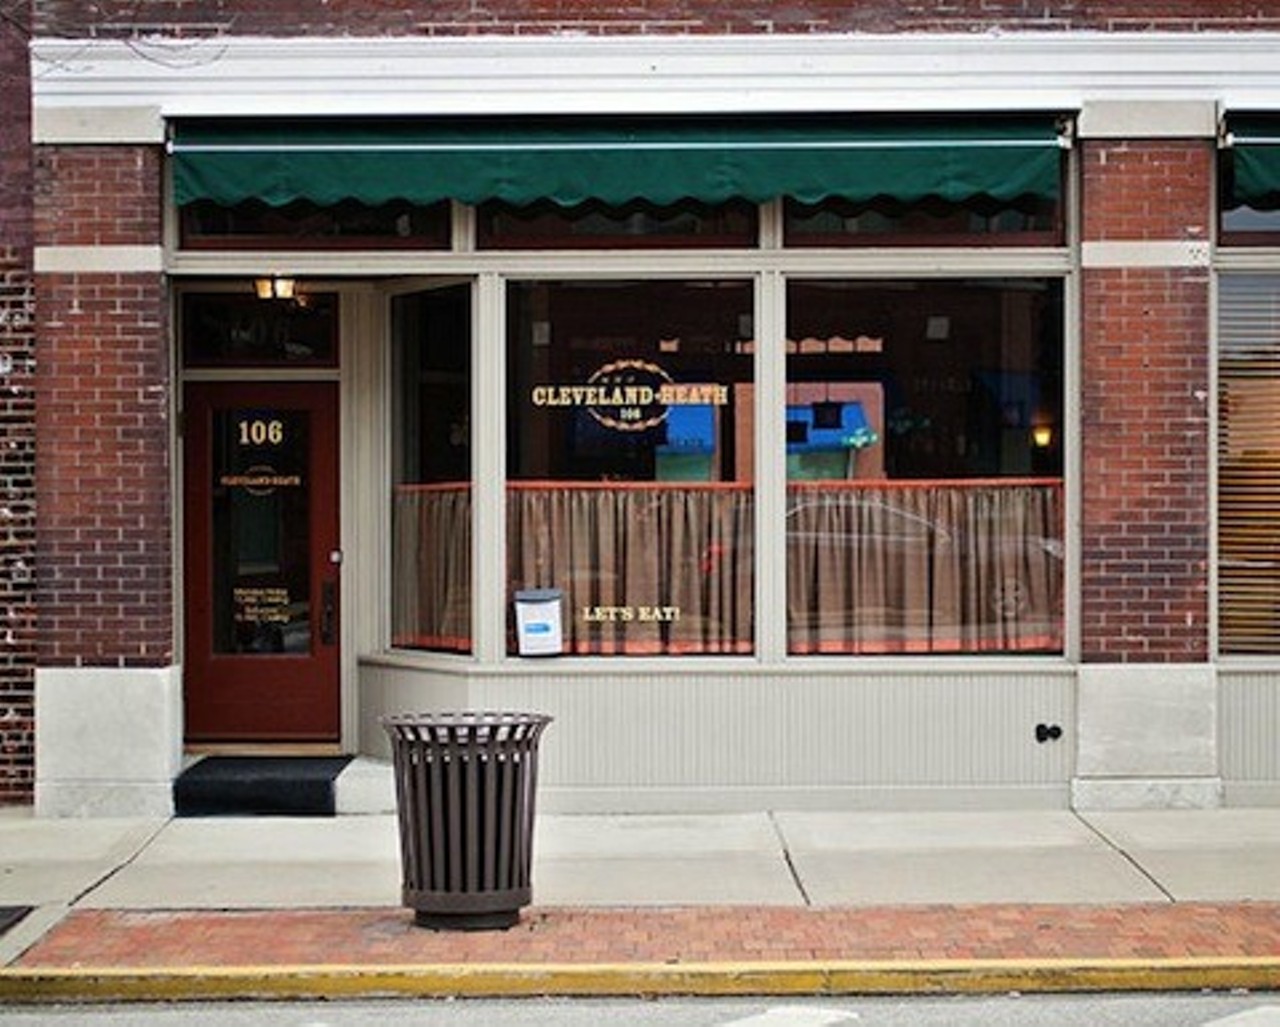 Cleveland-Heath
(206 North Main Street; Edwardsville, IL; 618-307-4830)
Gourmet comfort food is exactly what we're all needing right now and this Edwardsville spot serves some of the best in the business. (They offer outdoor dining, too.)
Photo credit: Jennifer Silverberg